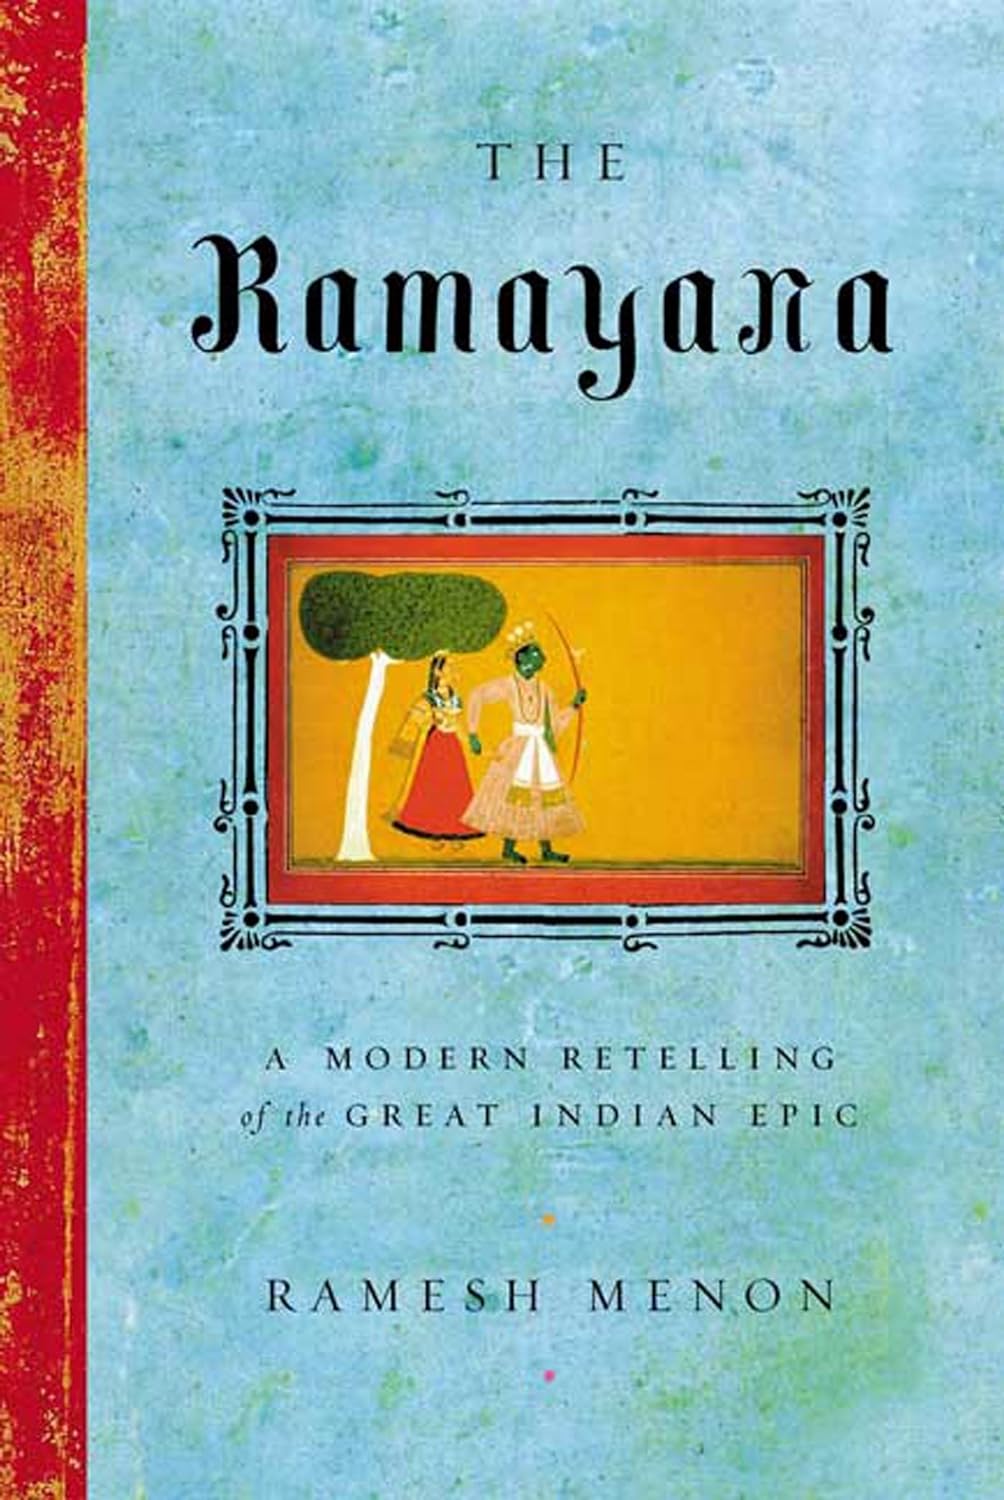 Ramayana: A Modern Retelling of the Great Indian Epic [Ramesh Menon] *Special Order*